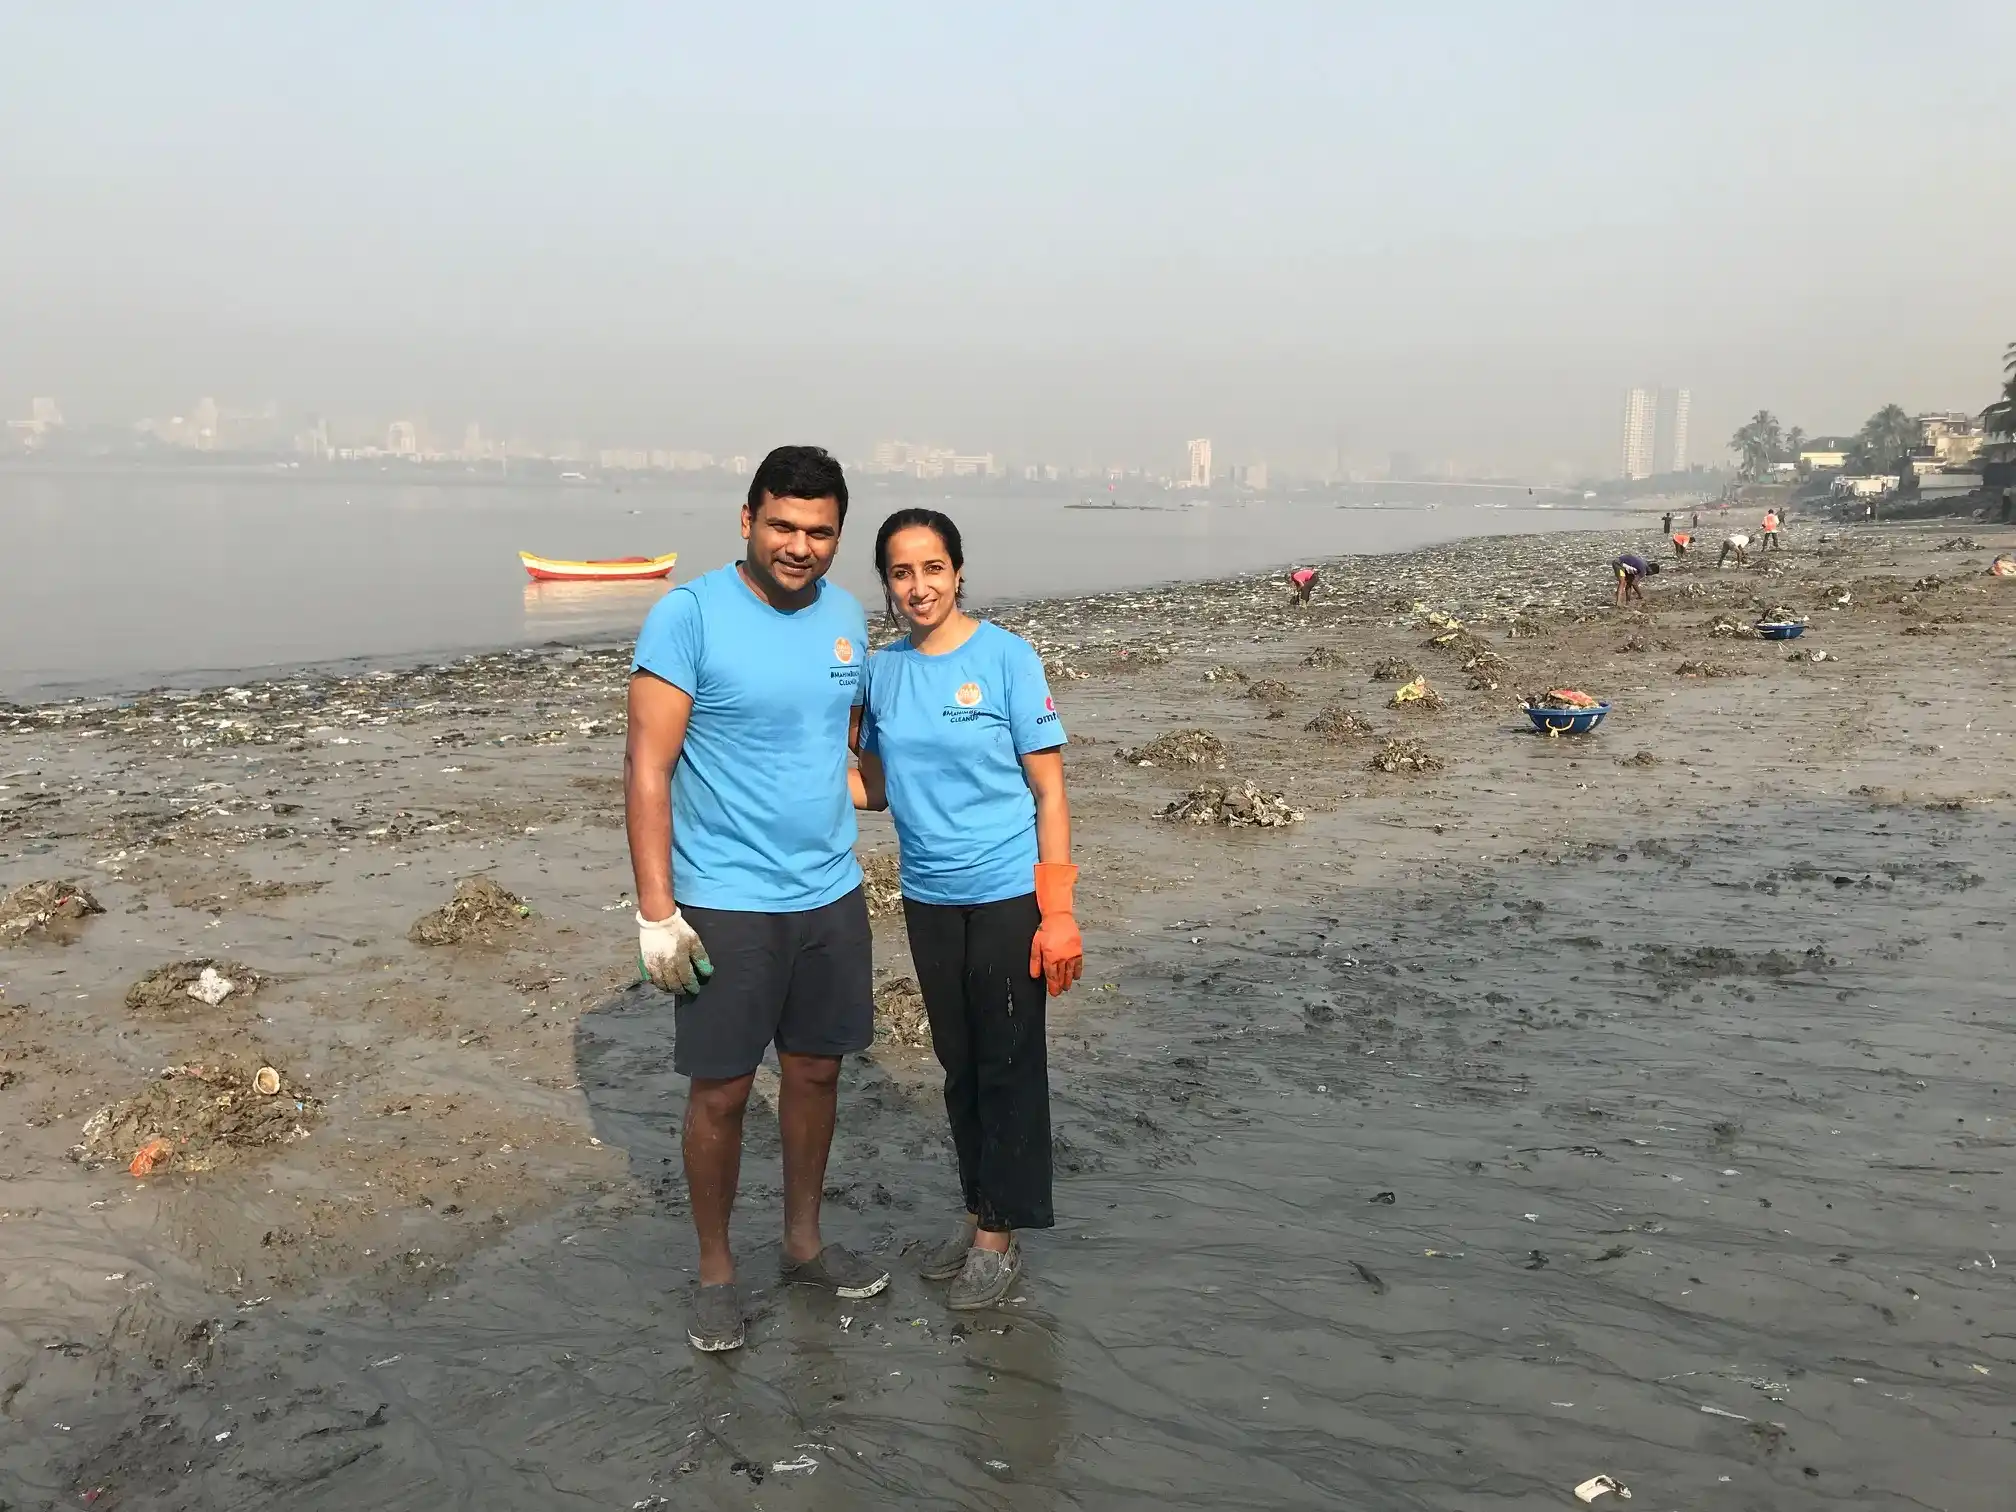 The couple has been clearing thrash off Mahim beach for years now through their frequent drives